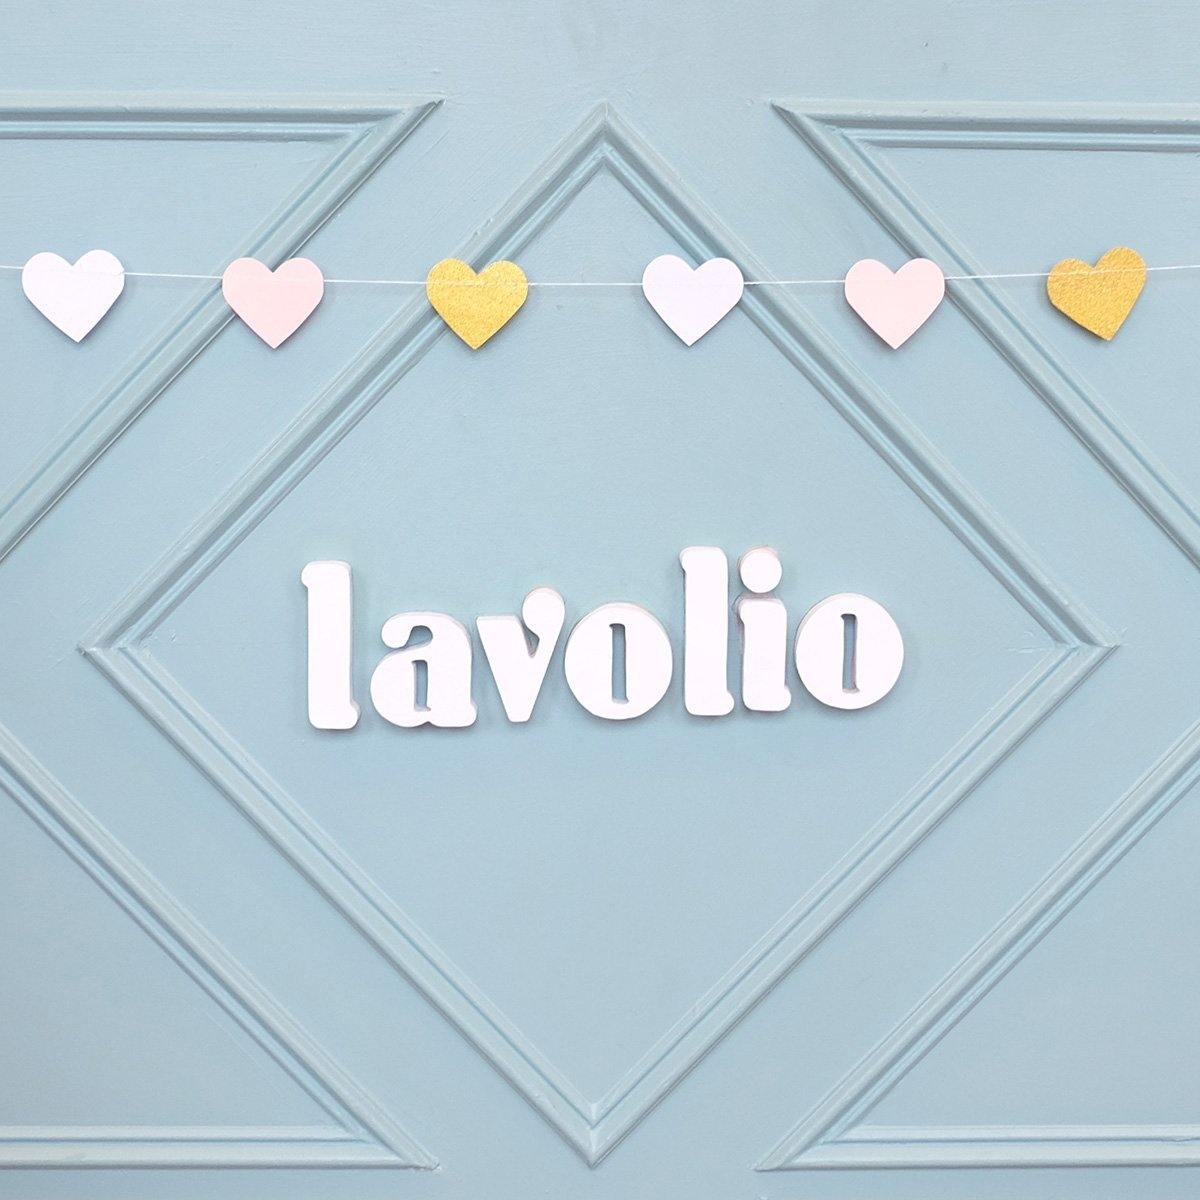 Top Tips To Impress Your Valentine With Italian Dinner And Confectionery - Lavolio Boutique Confectionery